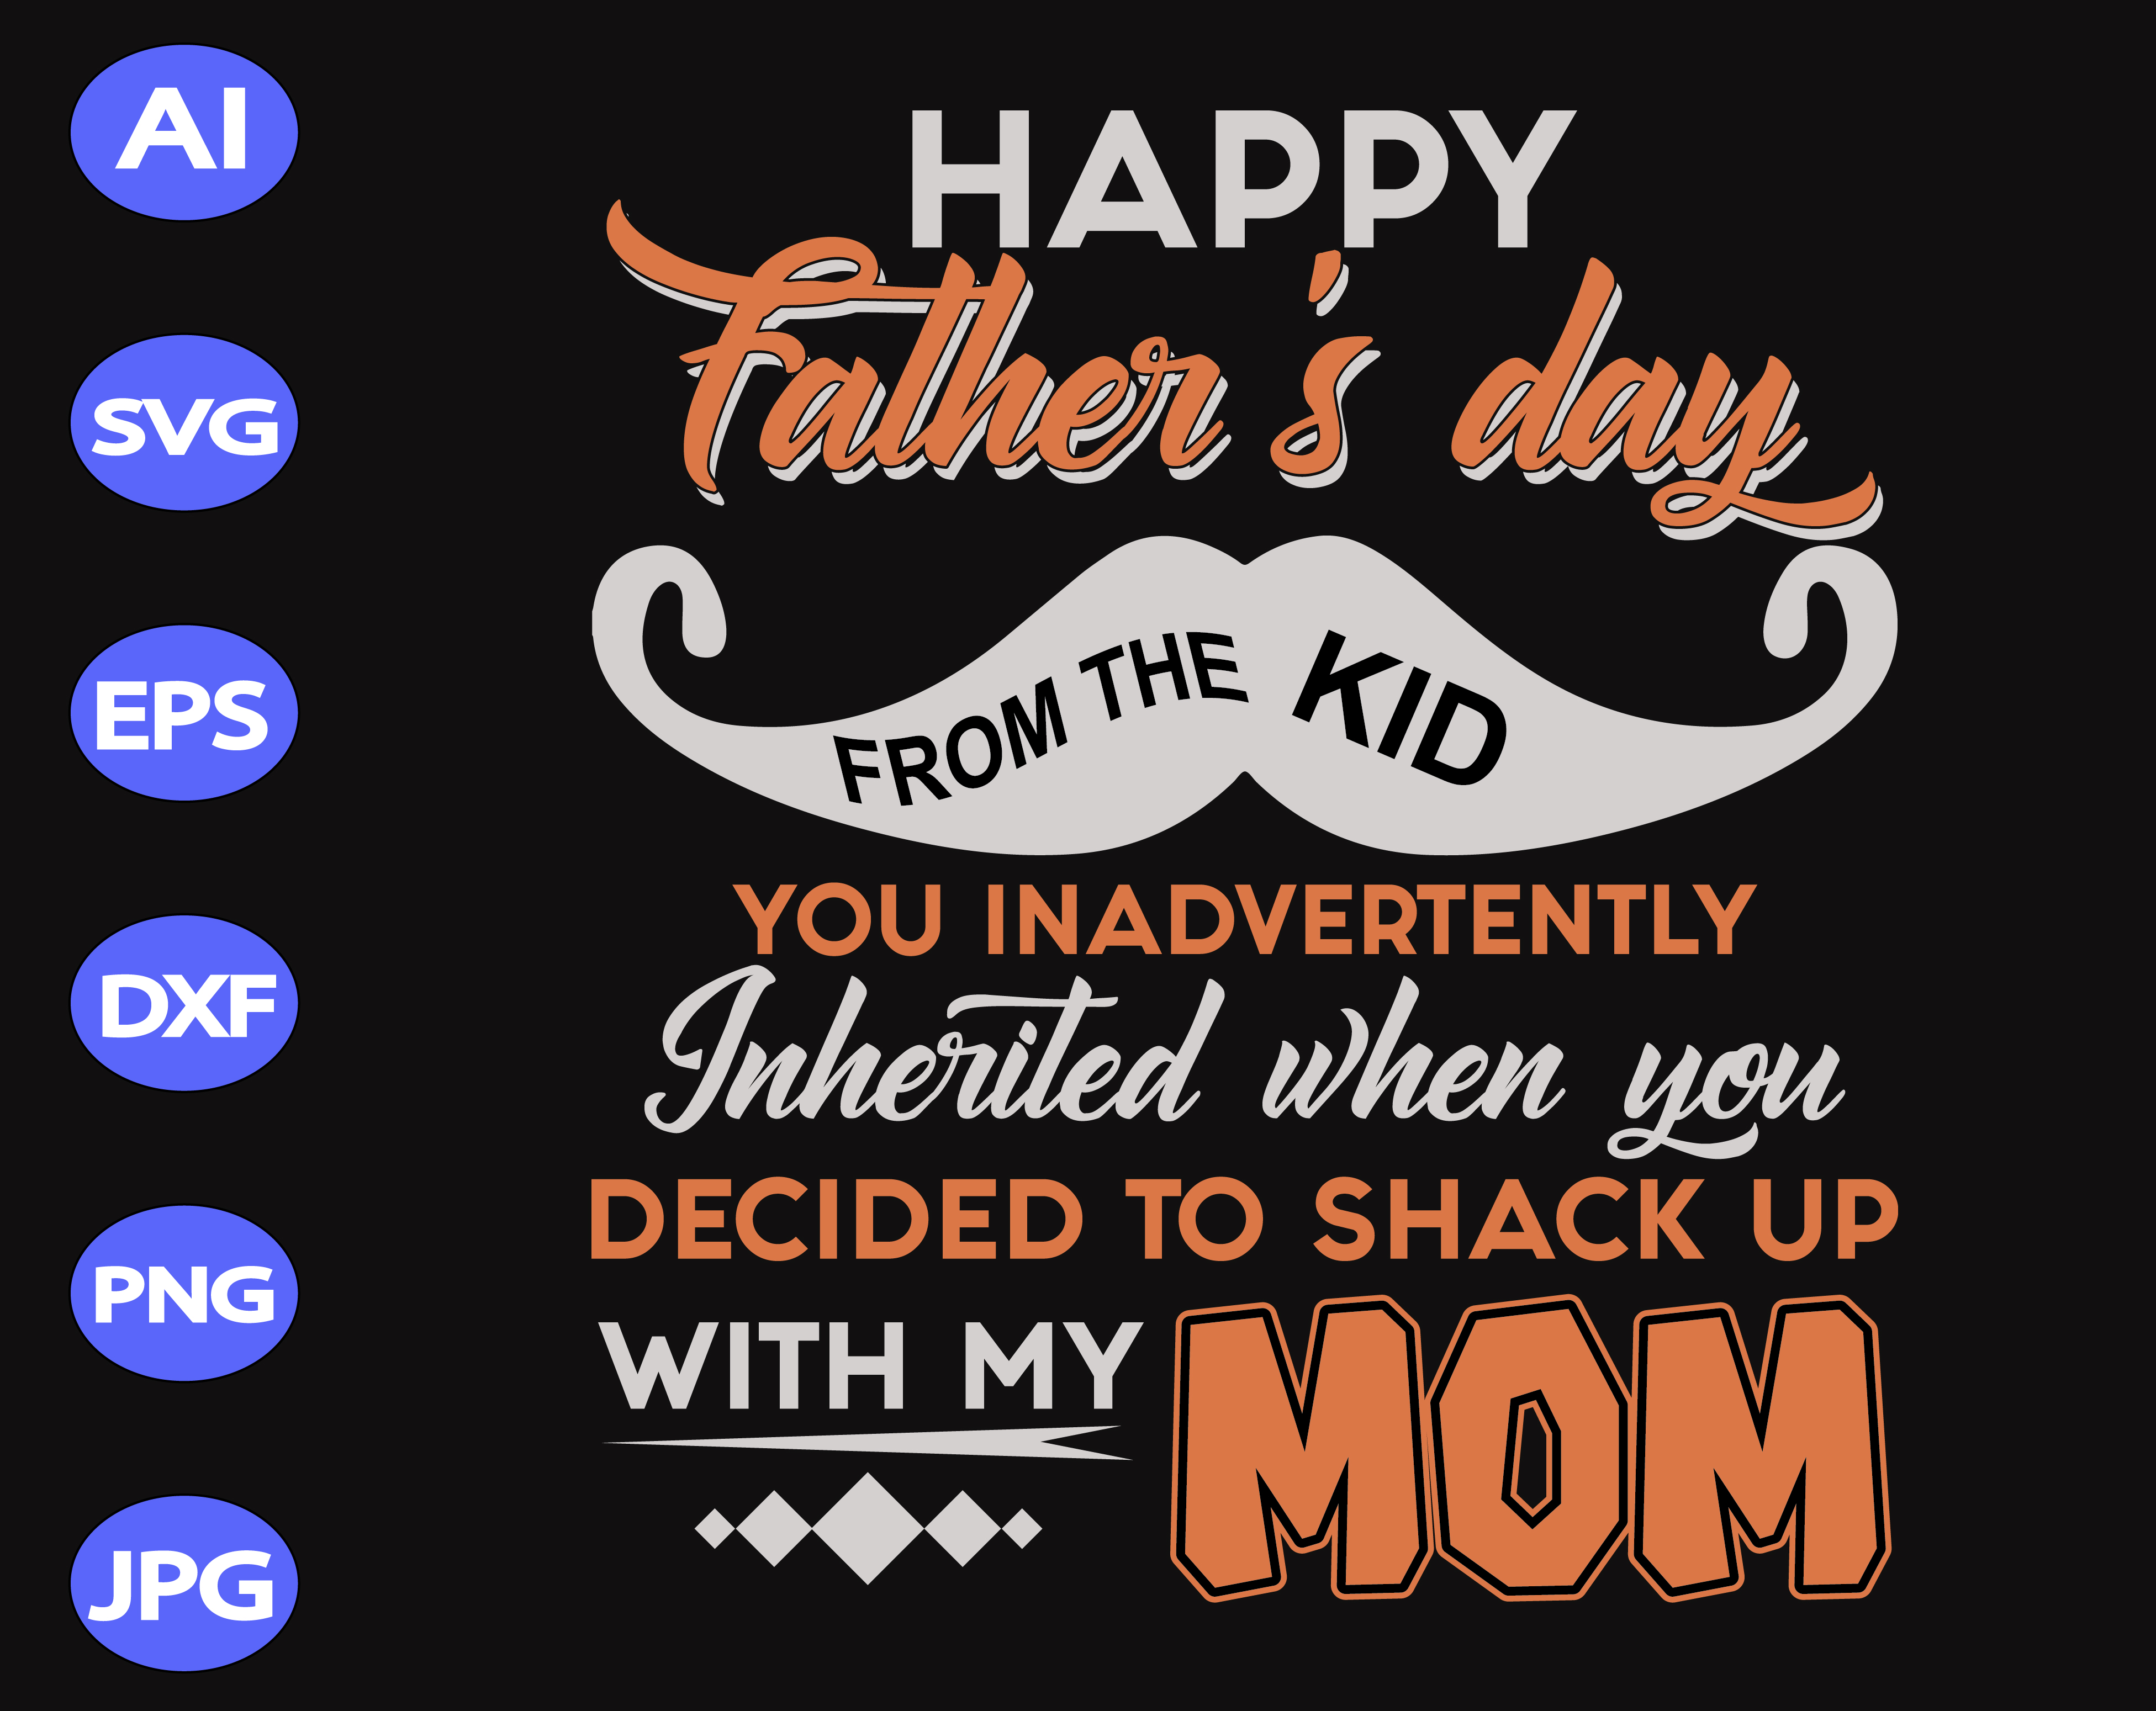 Download Happy Father S Day Form The Kid You Inadvertently Inherited When You Decided To Shack Up With My Mom Svg Dxf Eps Png Digital Download Designbtf Com